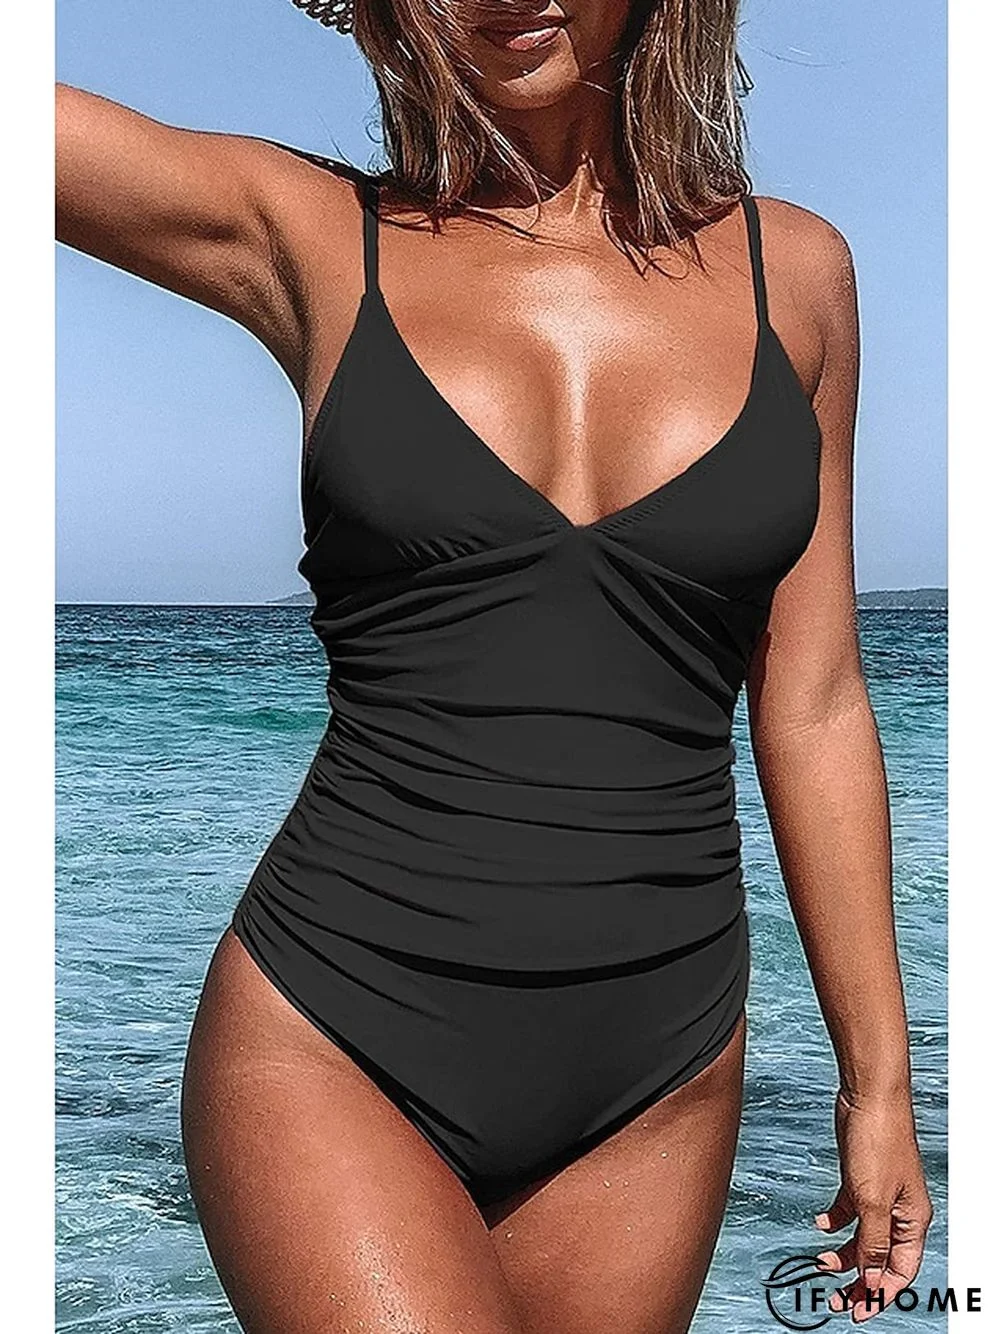 Women's Swimwear One Piece Normal Swimsuit Open Back Solid Color Light Blue Black Yellow Army Green Navy Blue Bodysuit Bathing Suits Sports Summer | IFYHOME